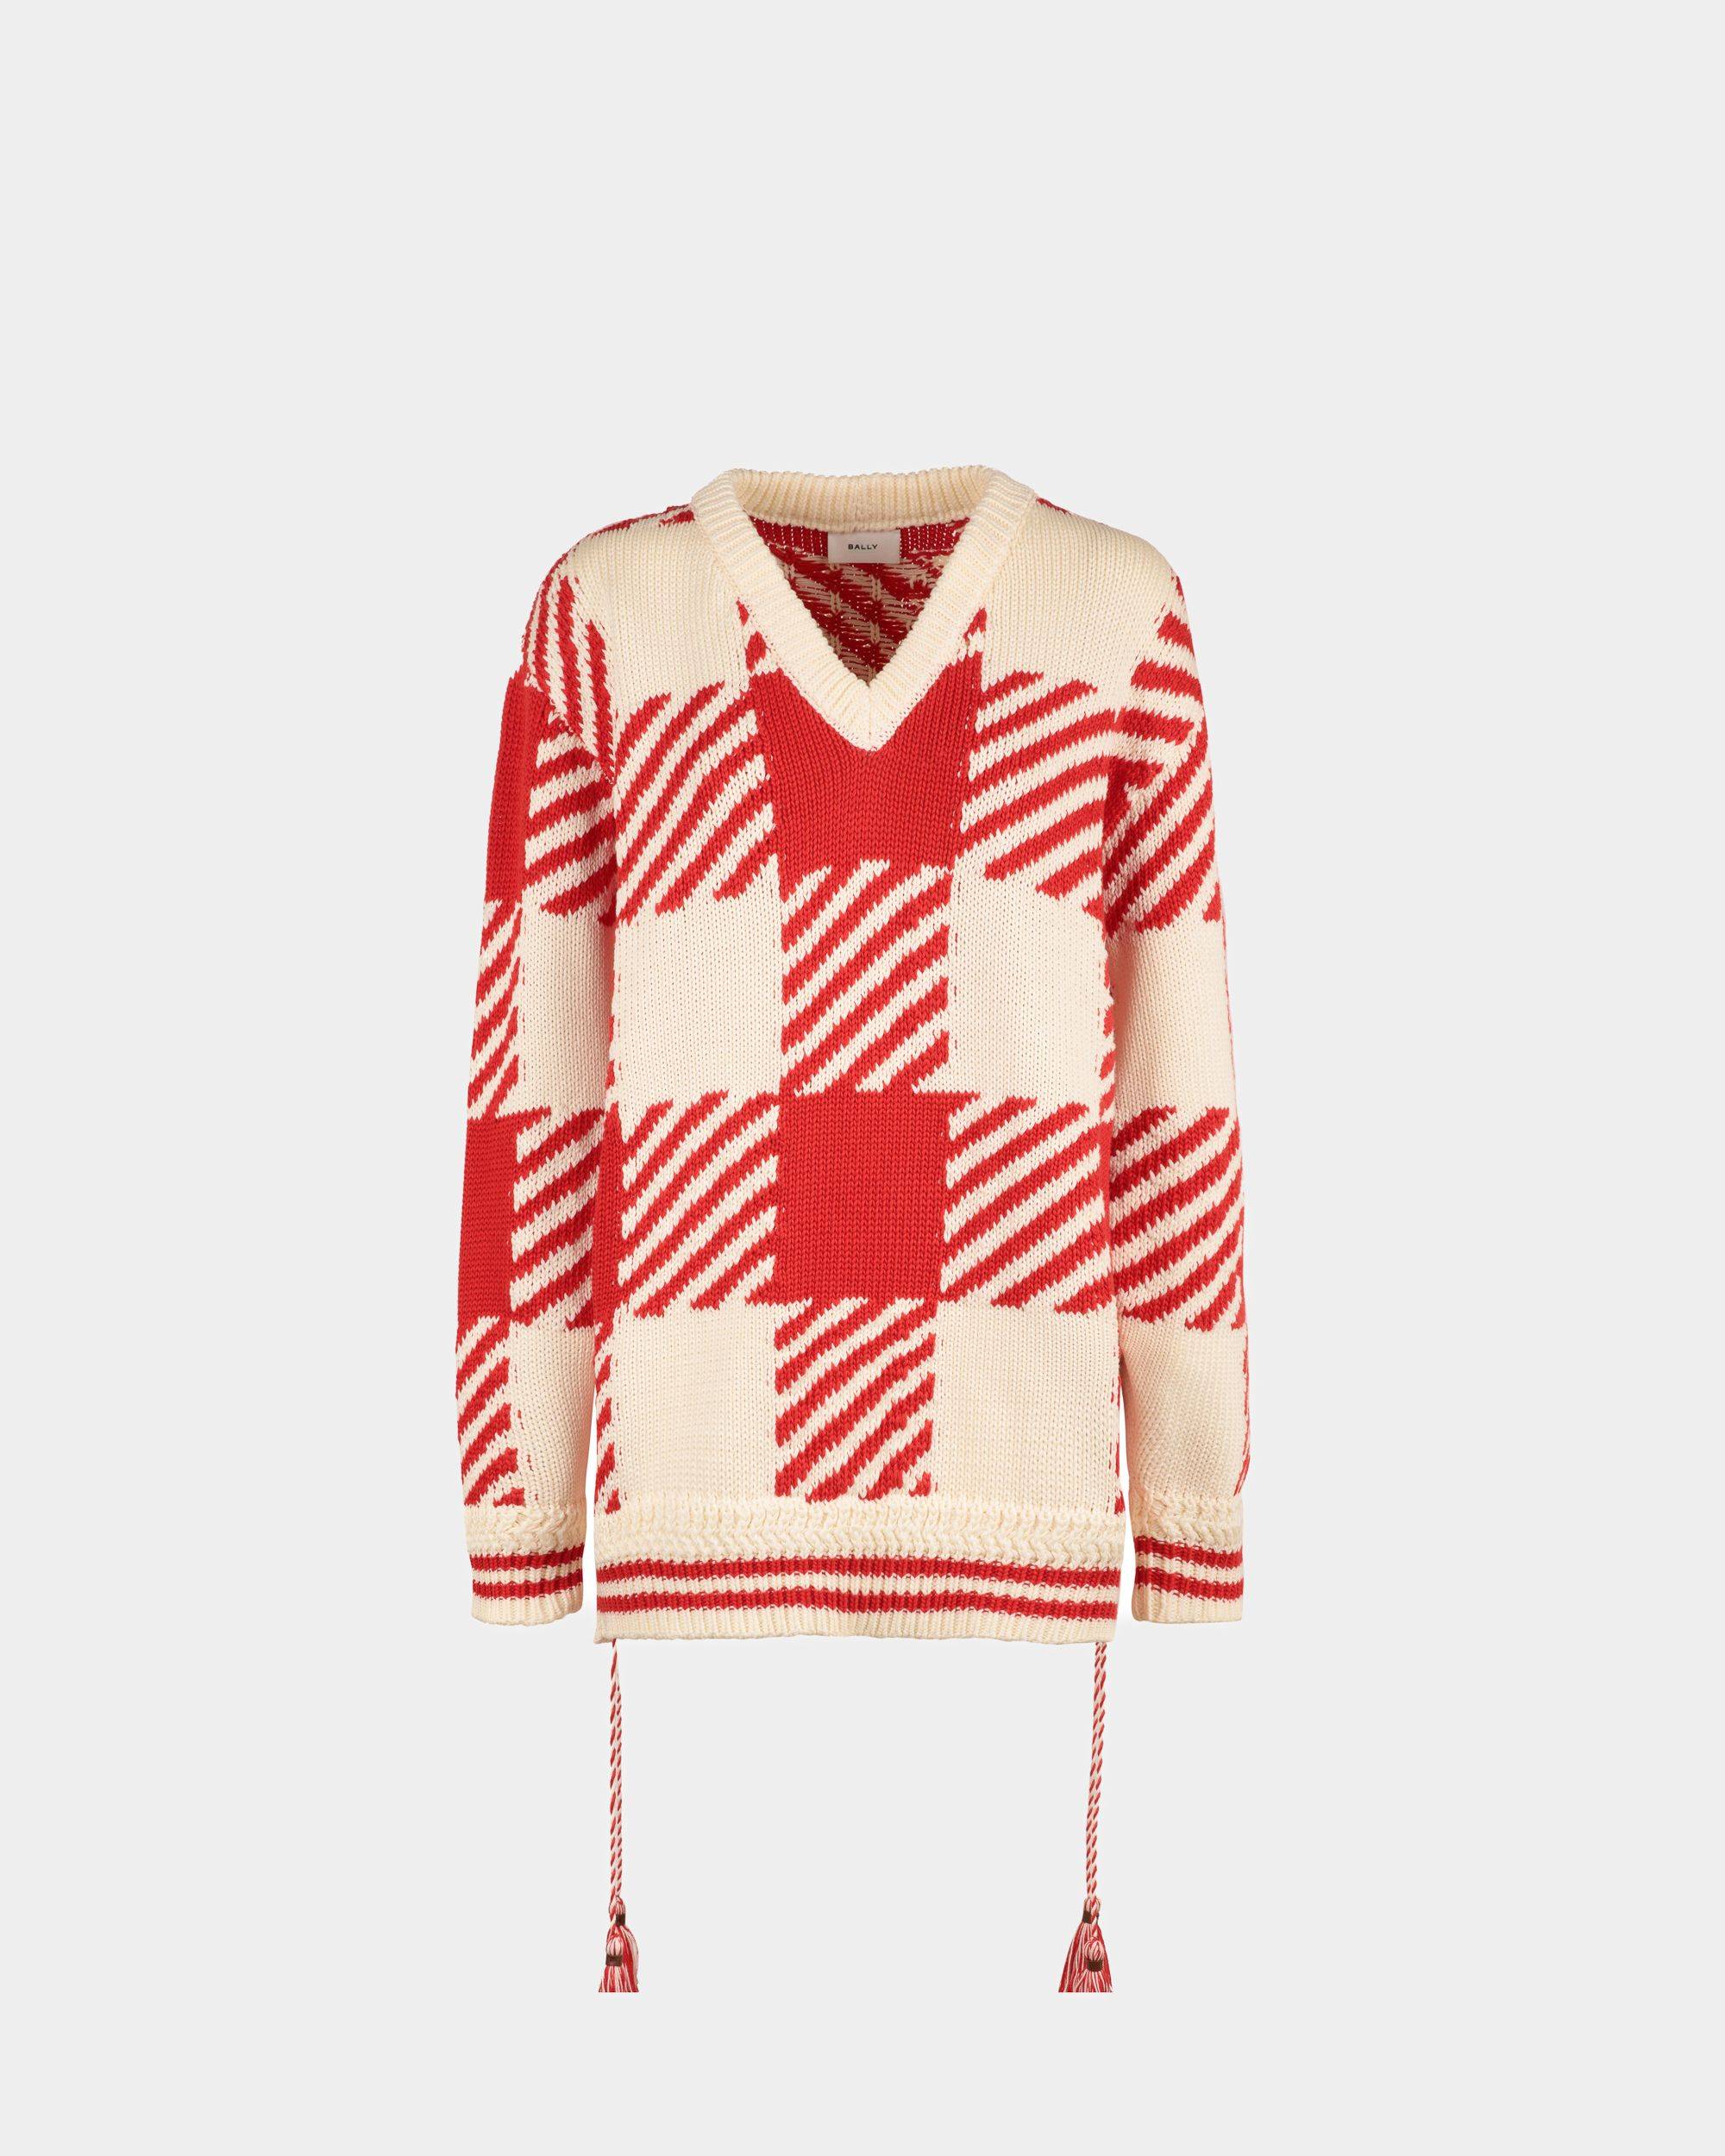 Women's V-Neck Sweater In Beige And Red Cotton | Bally | Still Life Front